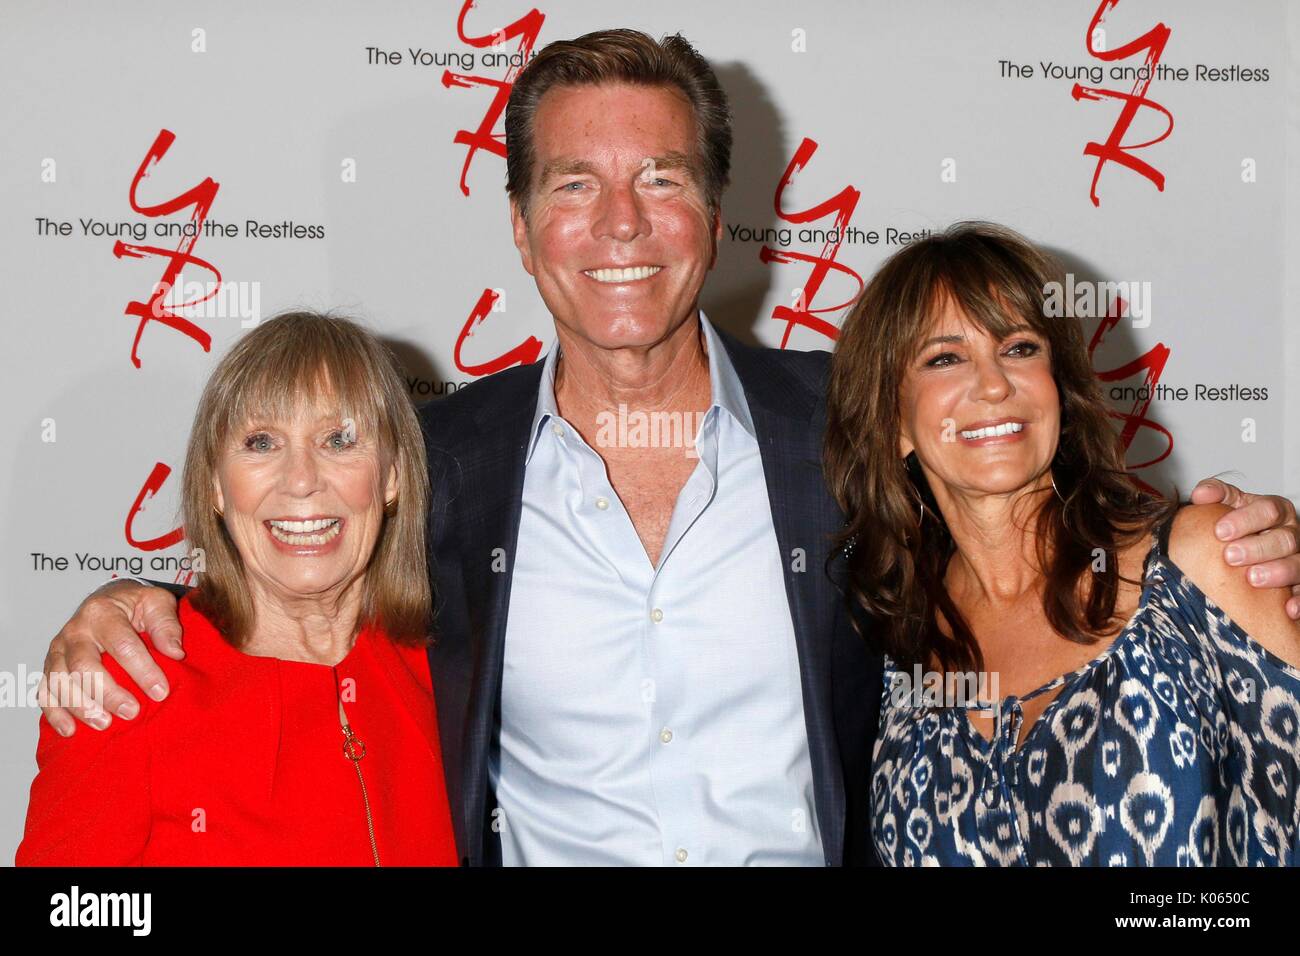 Burbank, CA. 19th Aug, 2017. Marla Adams, Peter Bergman, Jess Walton in attendance for YOUNG AND RESTLESS Fan Club Dinner, Burbank Convention Center, Burbank, CA August 19, 2017. Credit: Priscilla Grant/Everett Collection/Alamy Live News Stock Photo